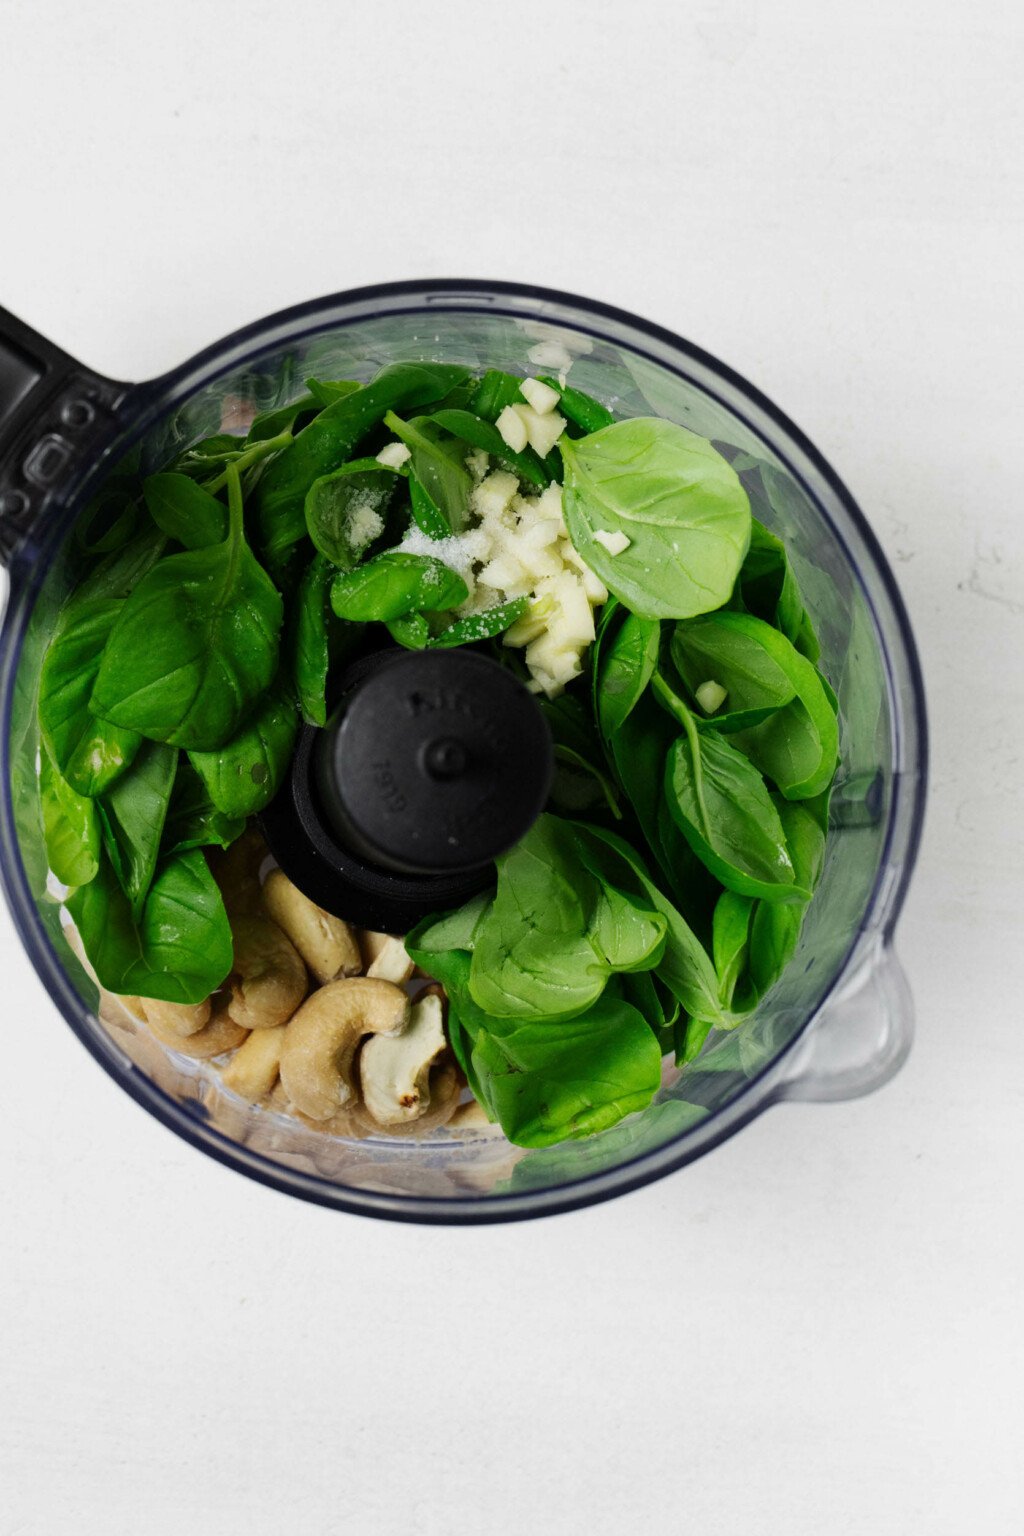 Basil leaves, garlic, and cashews are visible in the bowl of a food processor, pictured overhead. The processor is fitted with an S blade.